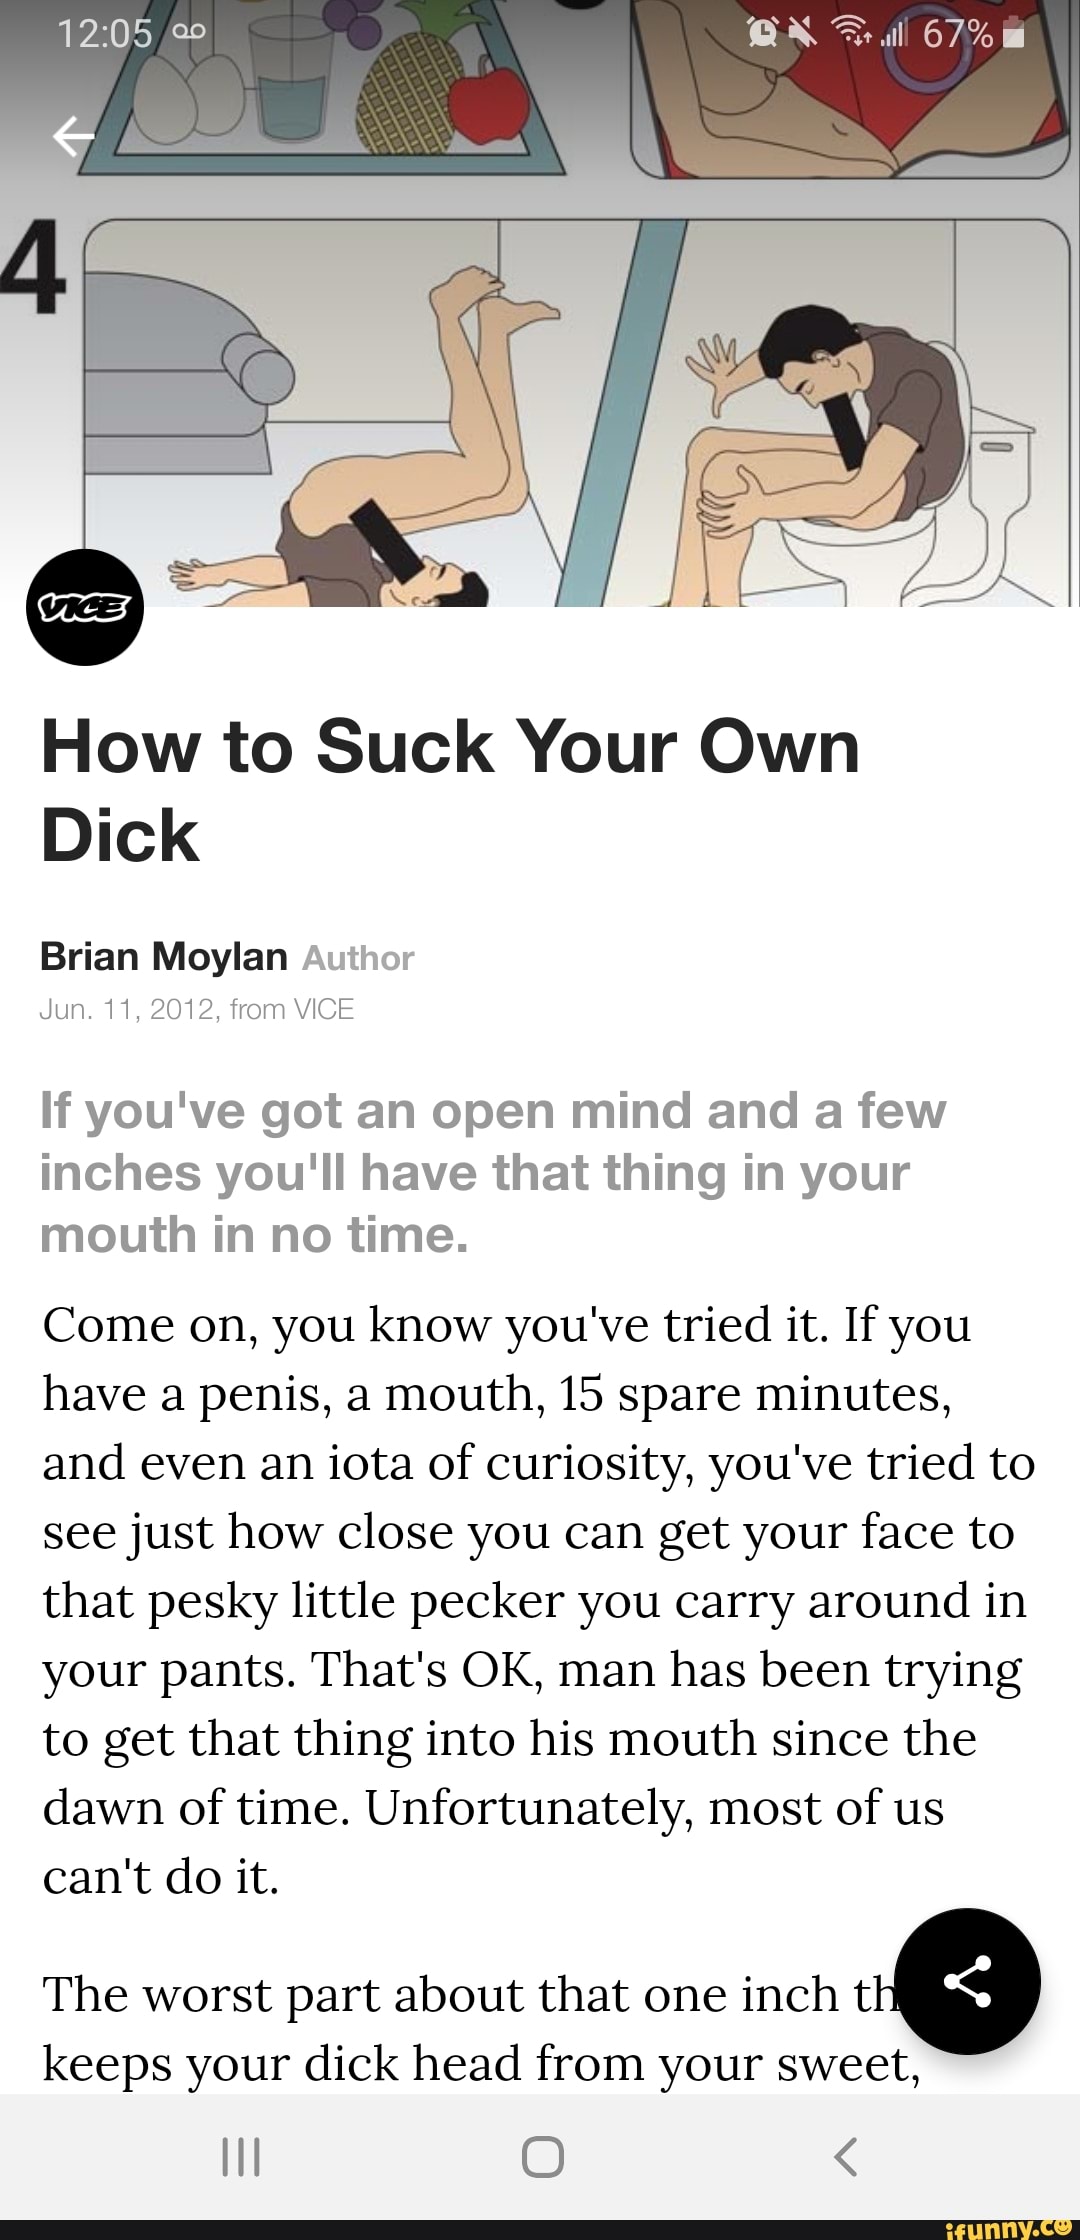 How to suck on your own dick